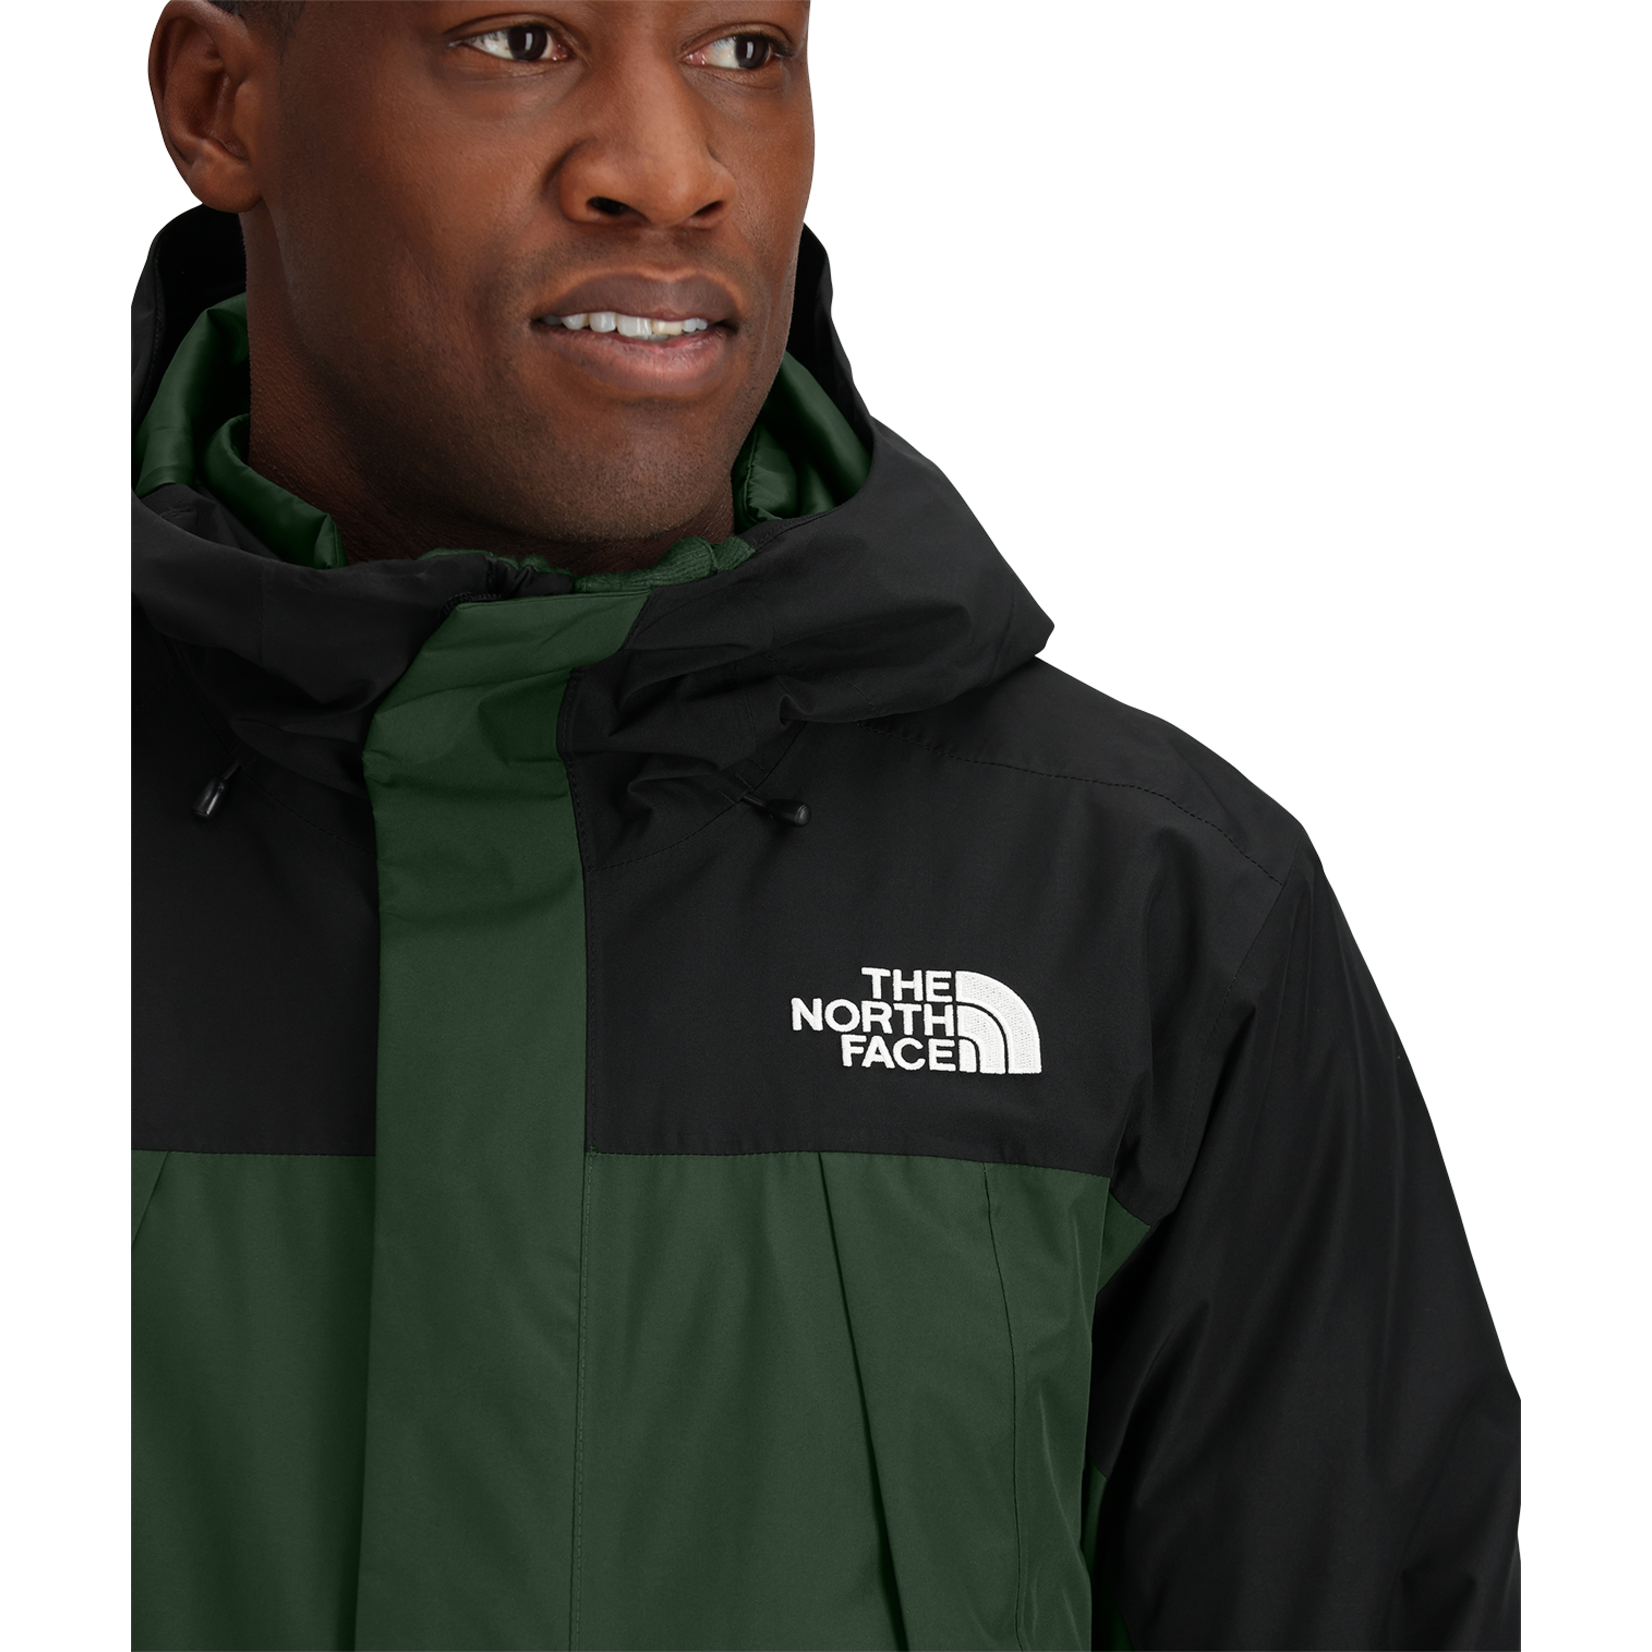 The North Face Men's Clement Triclimate Jacket for Sale - Ski Shack ...